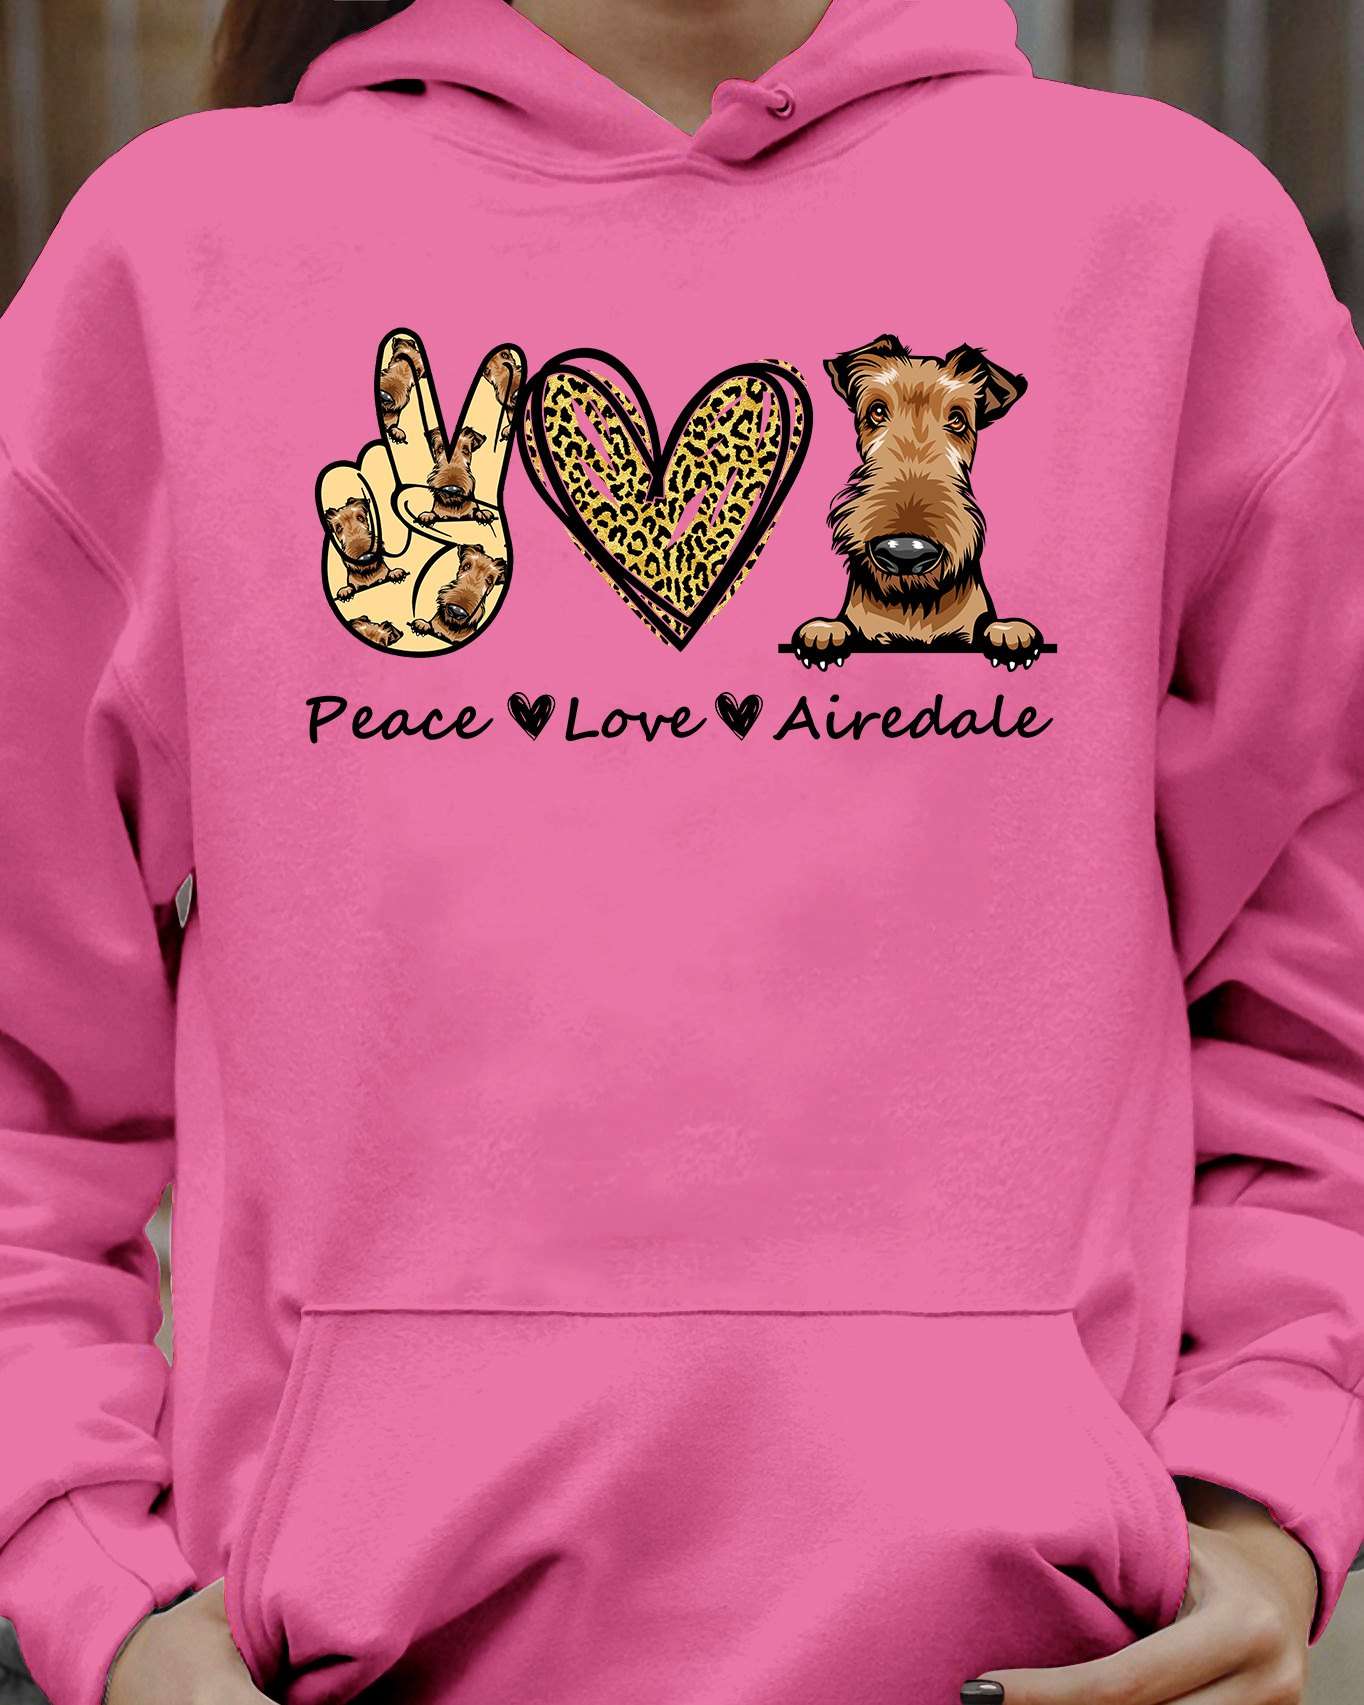 Peace love Airedale - Love Airedale dog, gift for dog lover